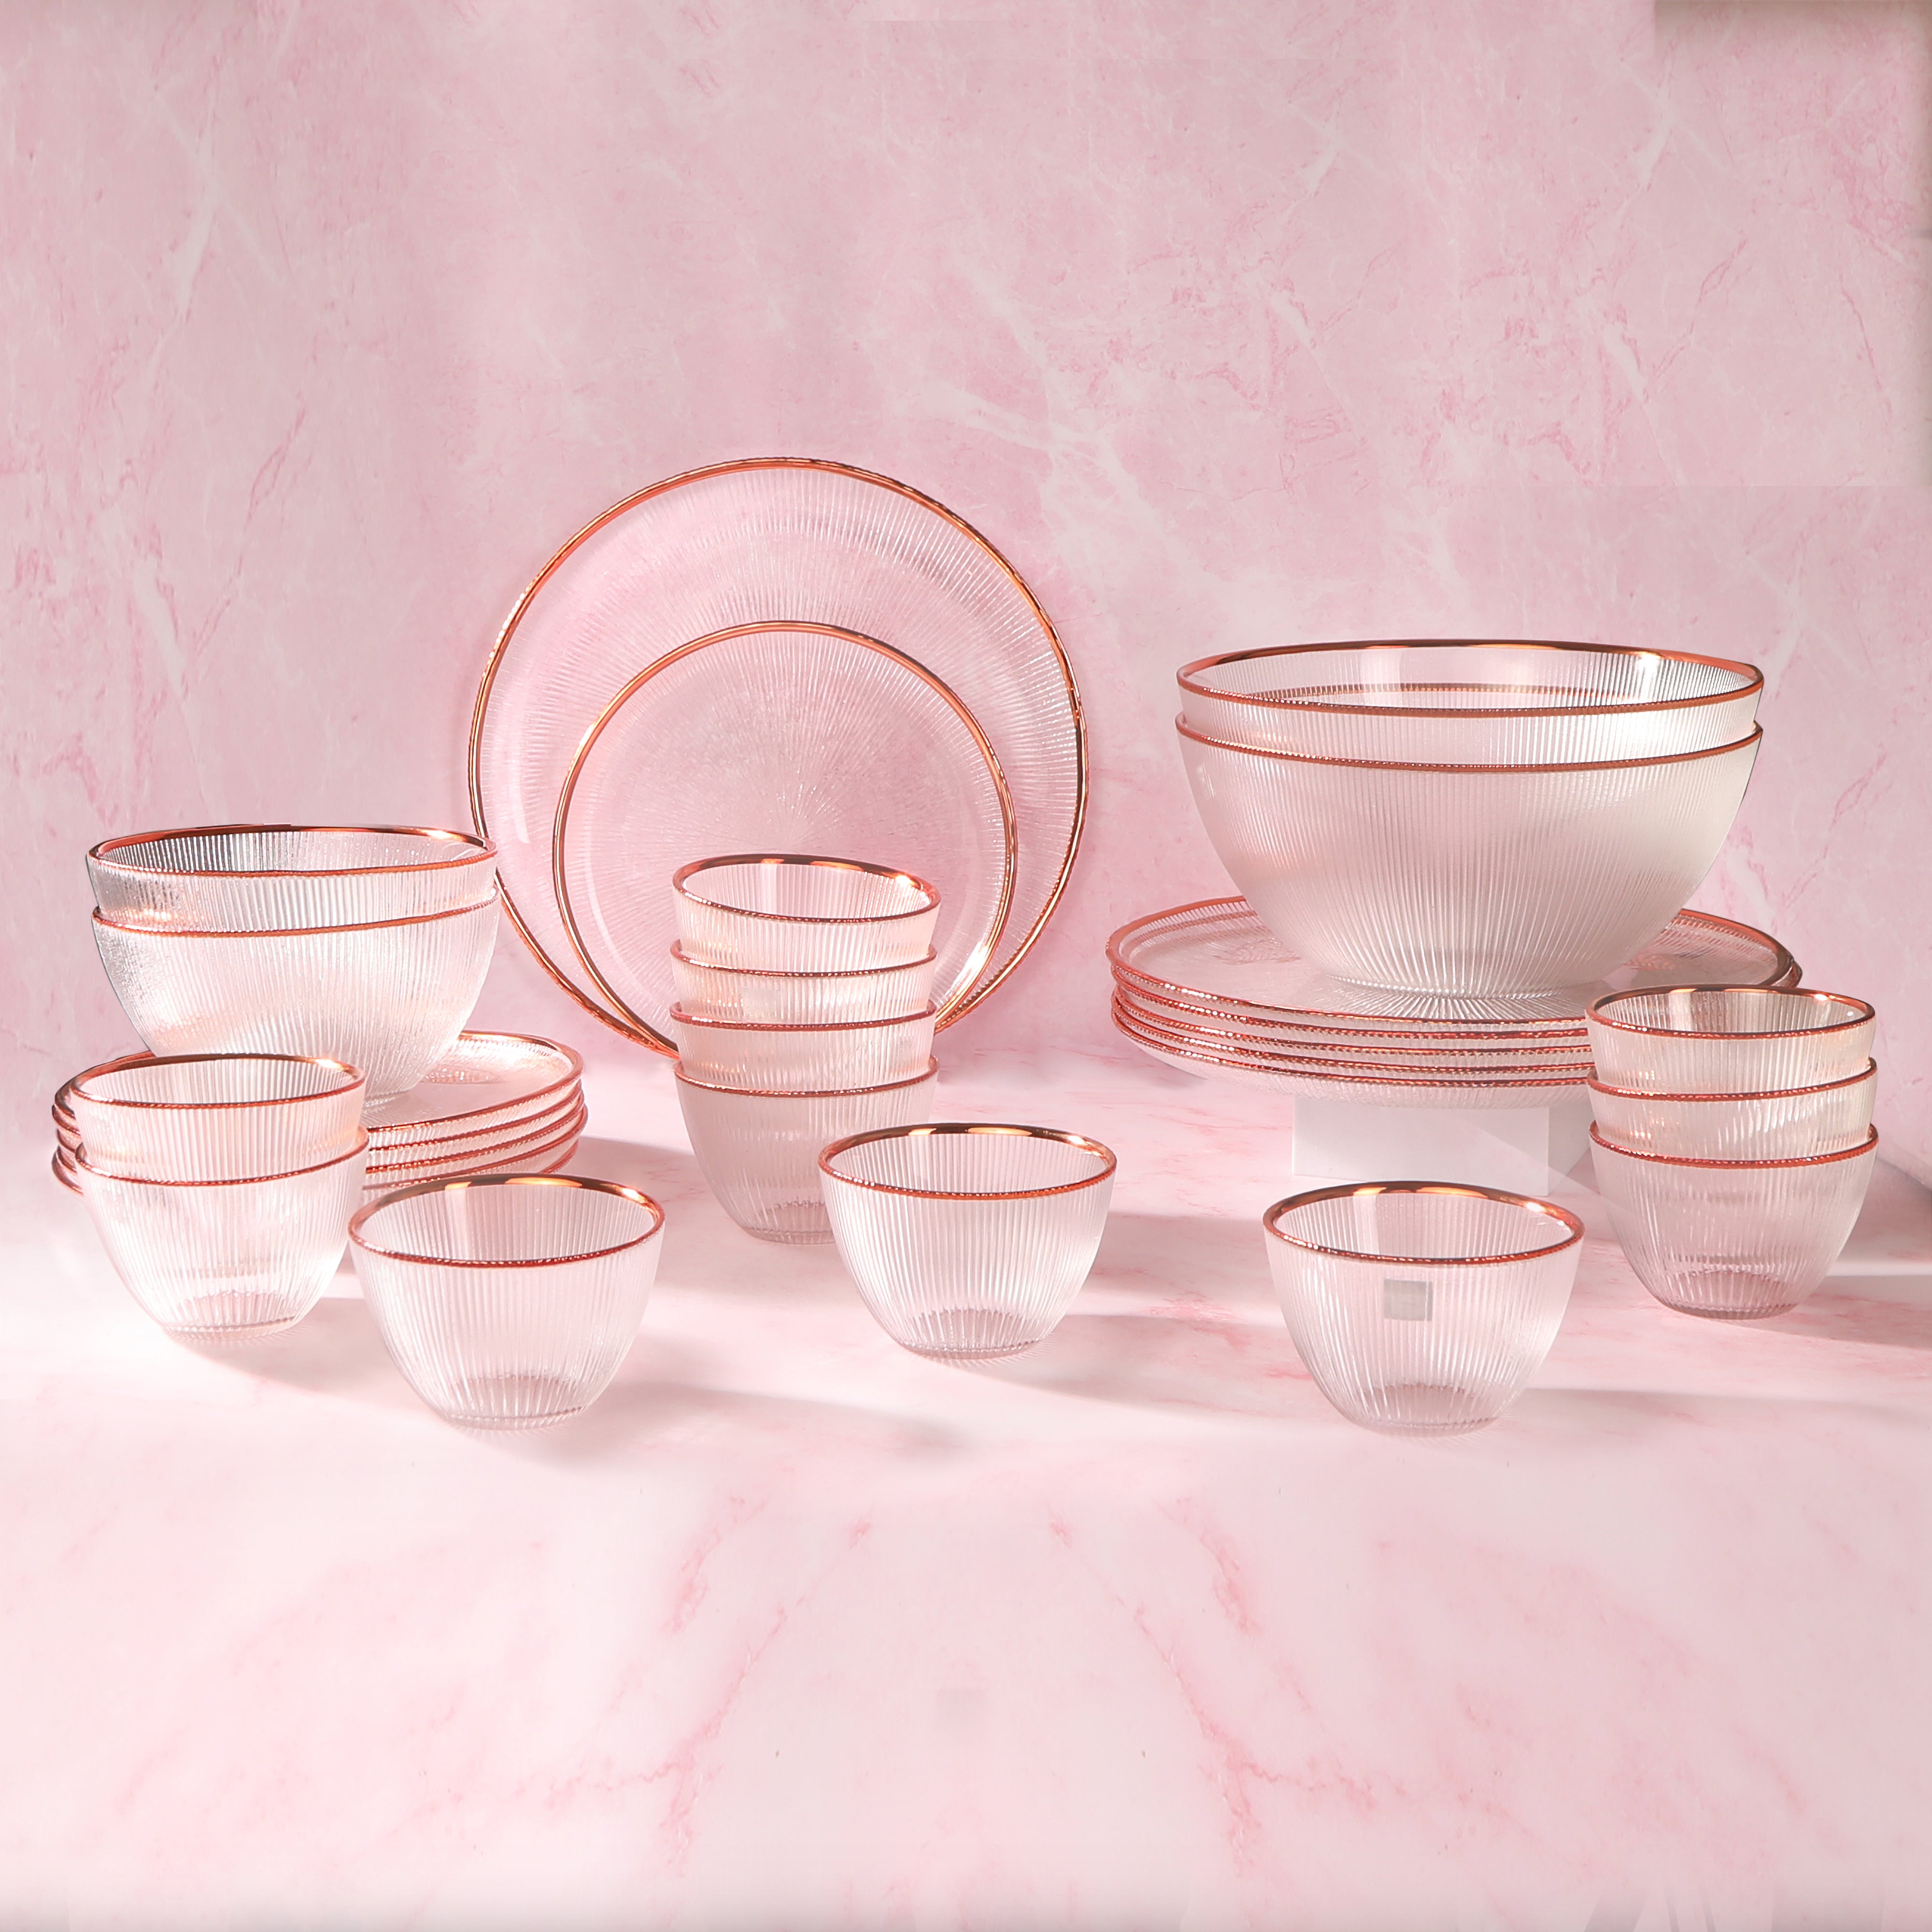 THE HOME CO. Dinner Set Of 28 Pcs - Glass With Rose Gold Rim